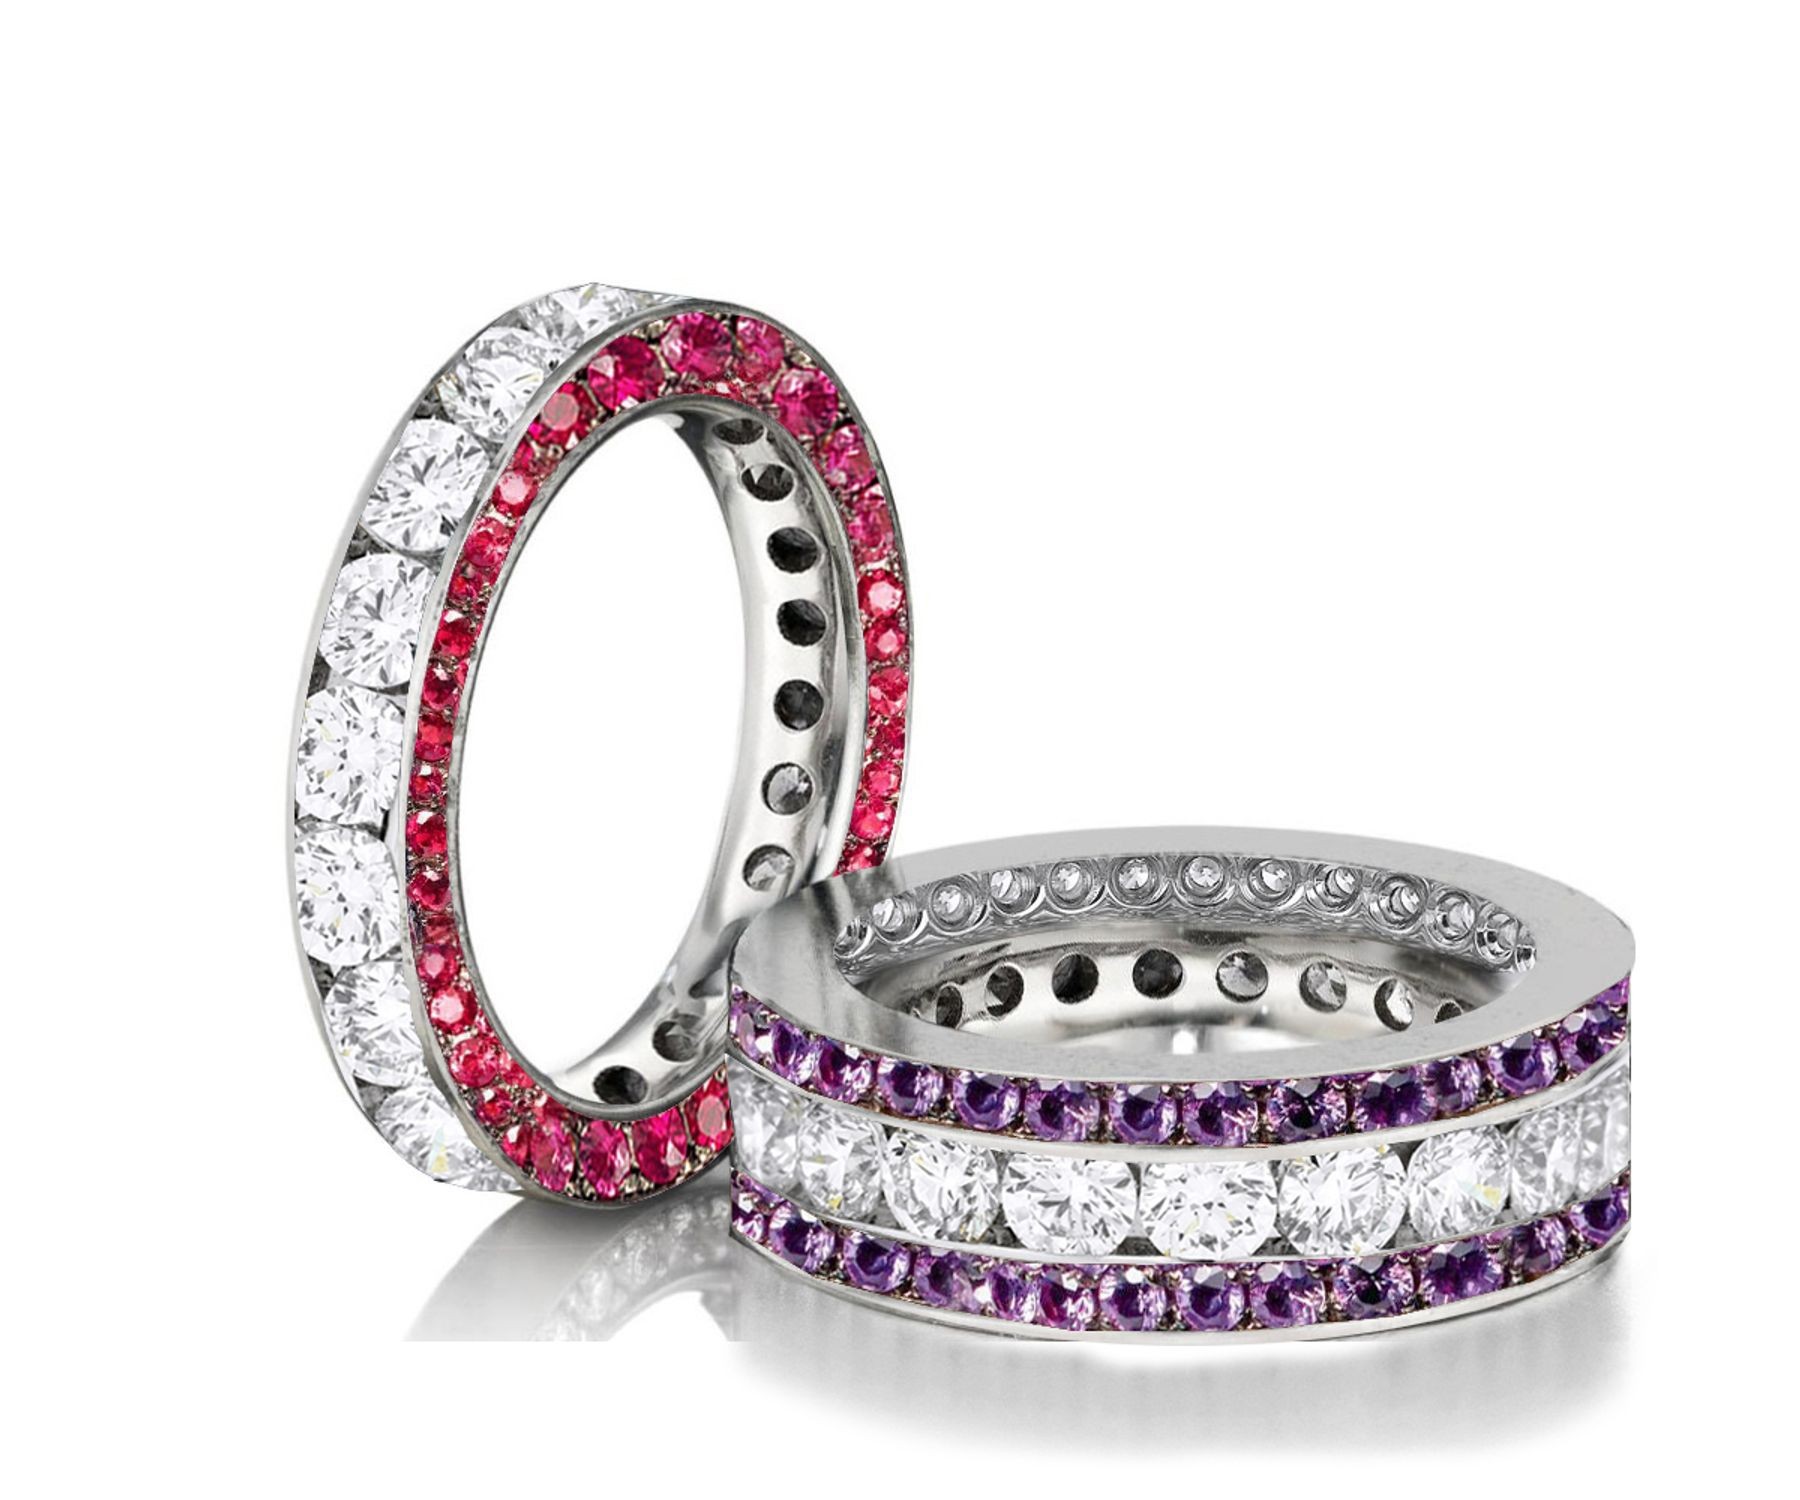 Made to Order Great Selection of Channel Set Brilliant Cut Round Diamonds Pink & Purple Sapphire Eternity Rings & Bands